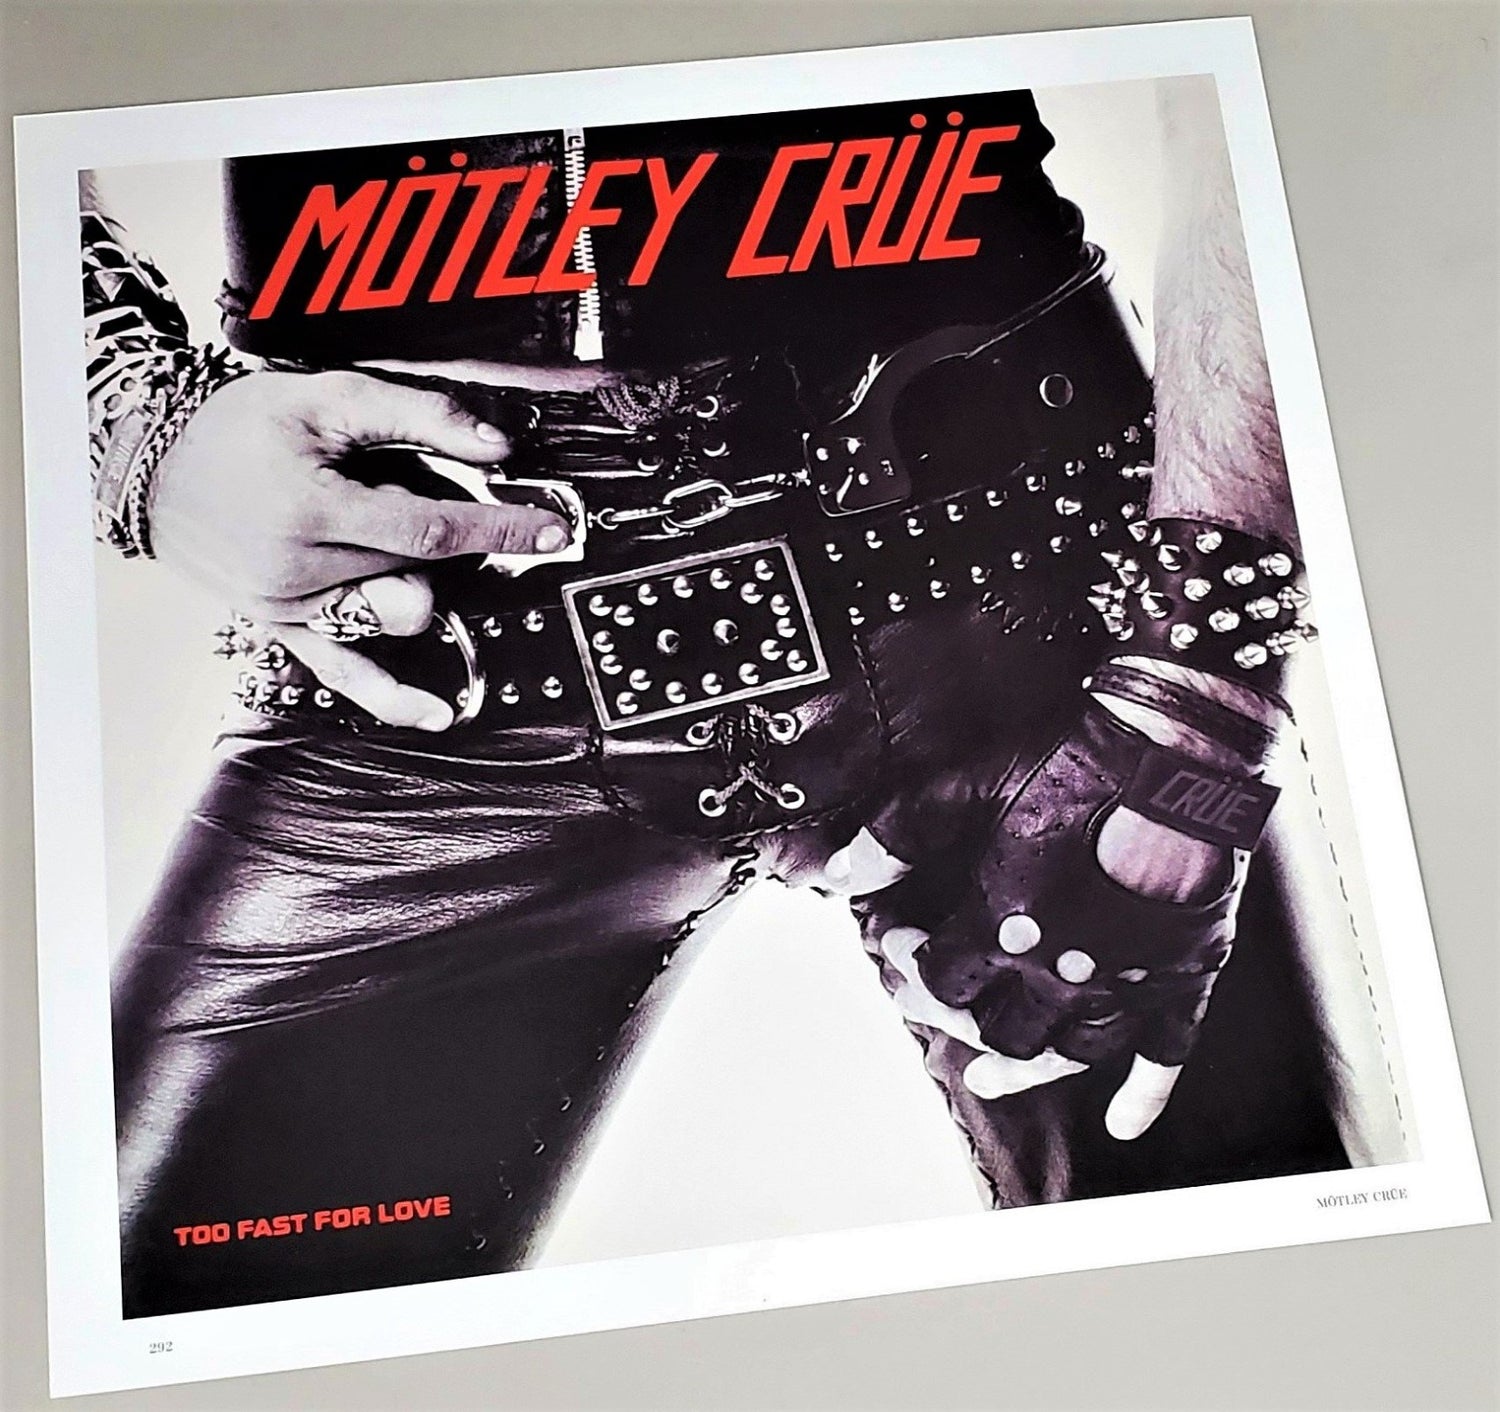 Motley Crue 1982 Too Fast For Love cover art page featured in Rock Covers 2014 coffee table book